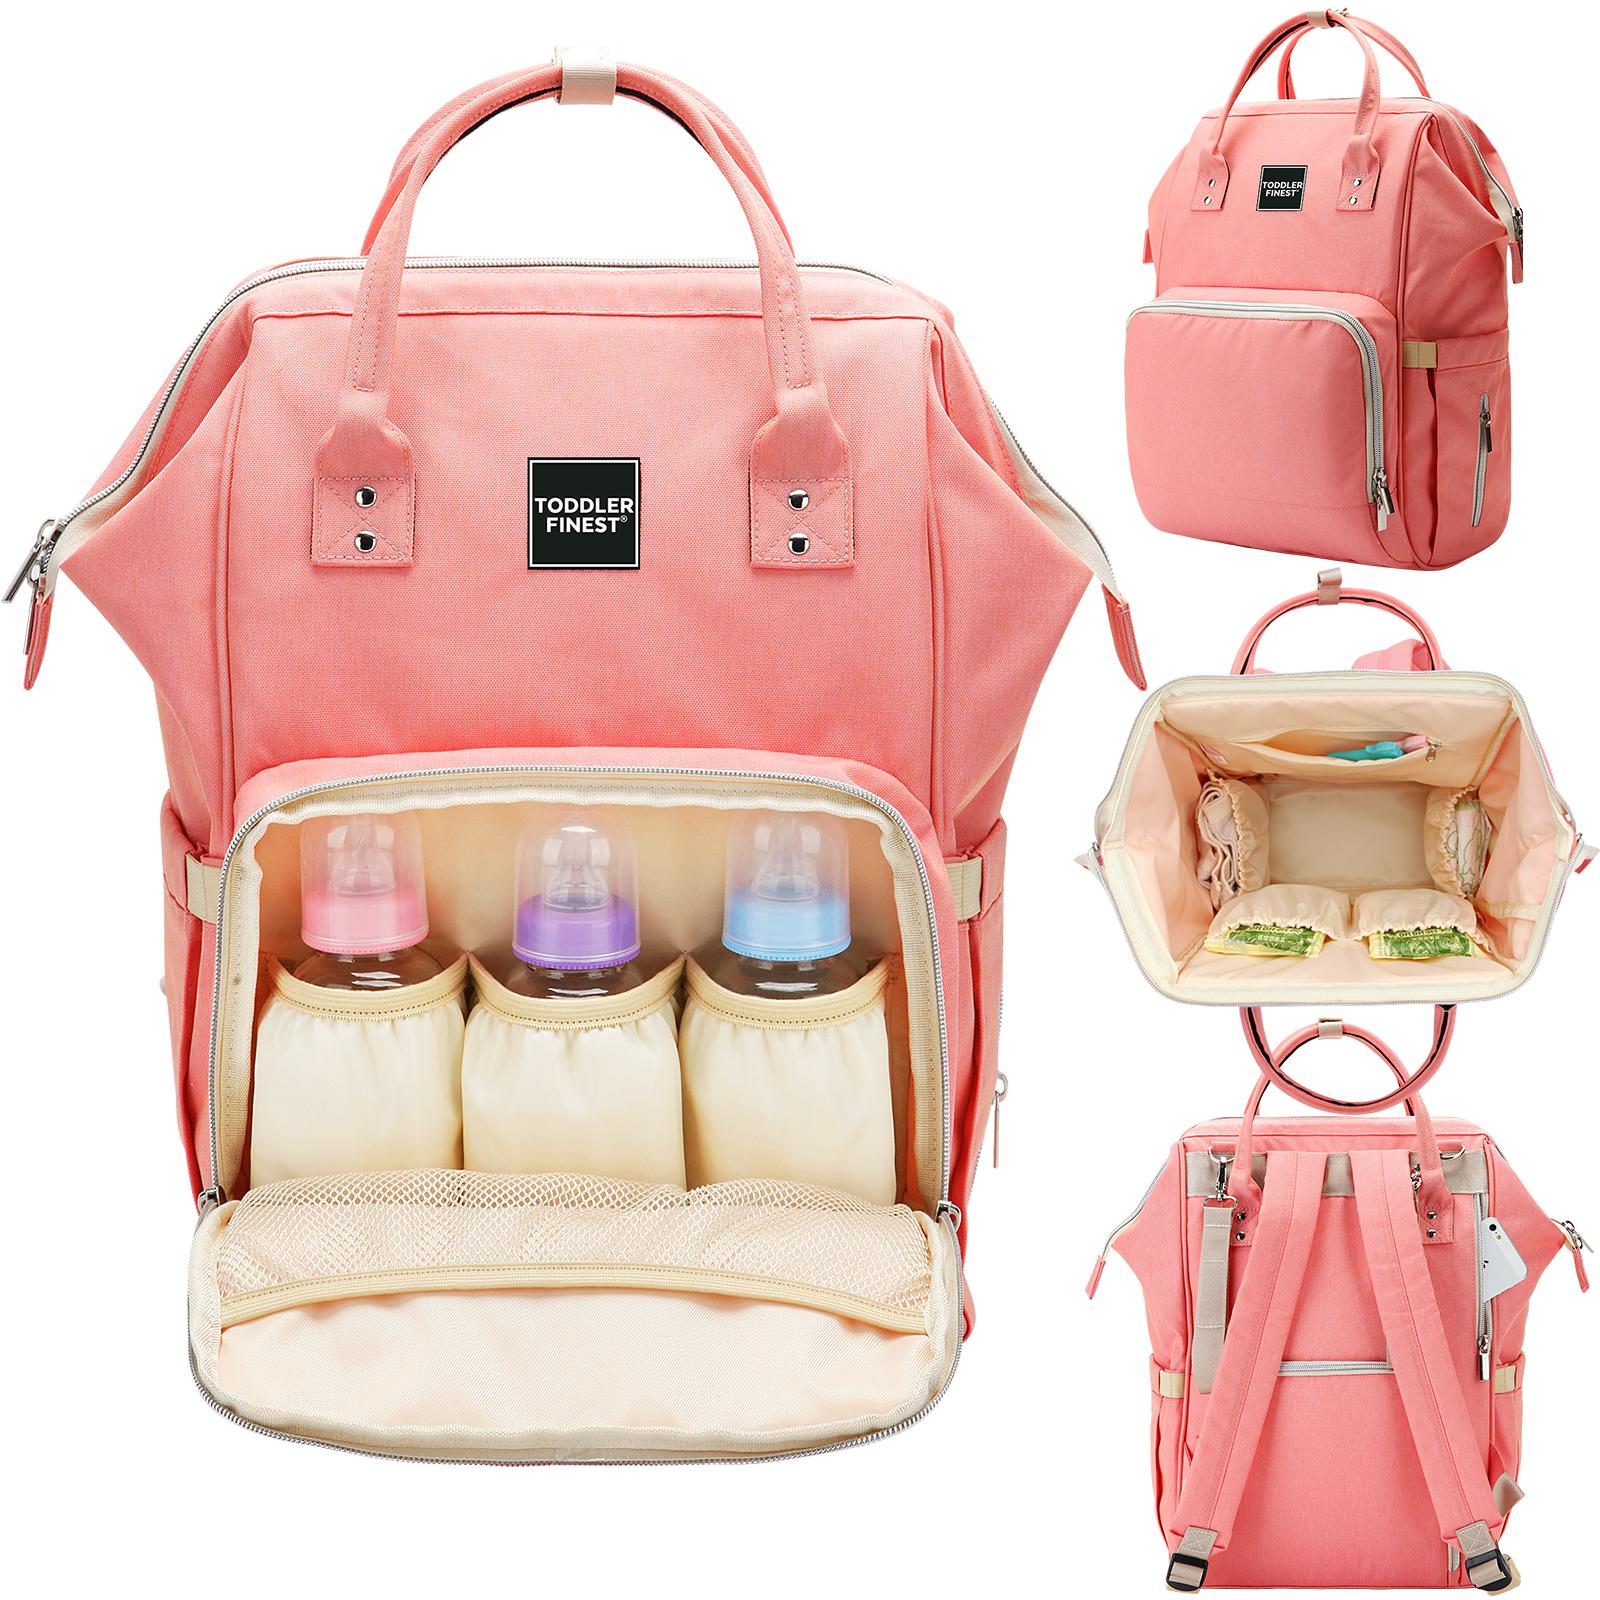 Designer Diaper Bag Backpack - Mummy Fashion Nappy Baby Bags ...